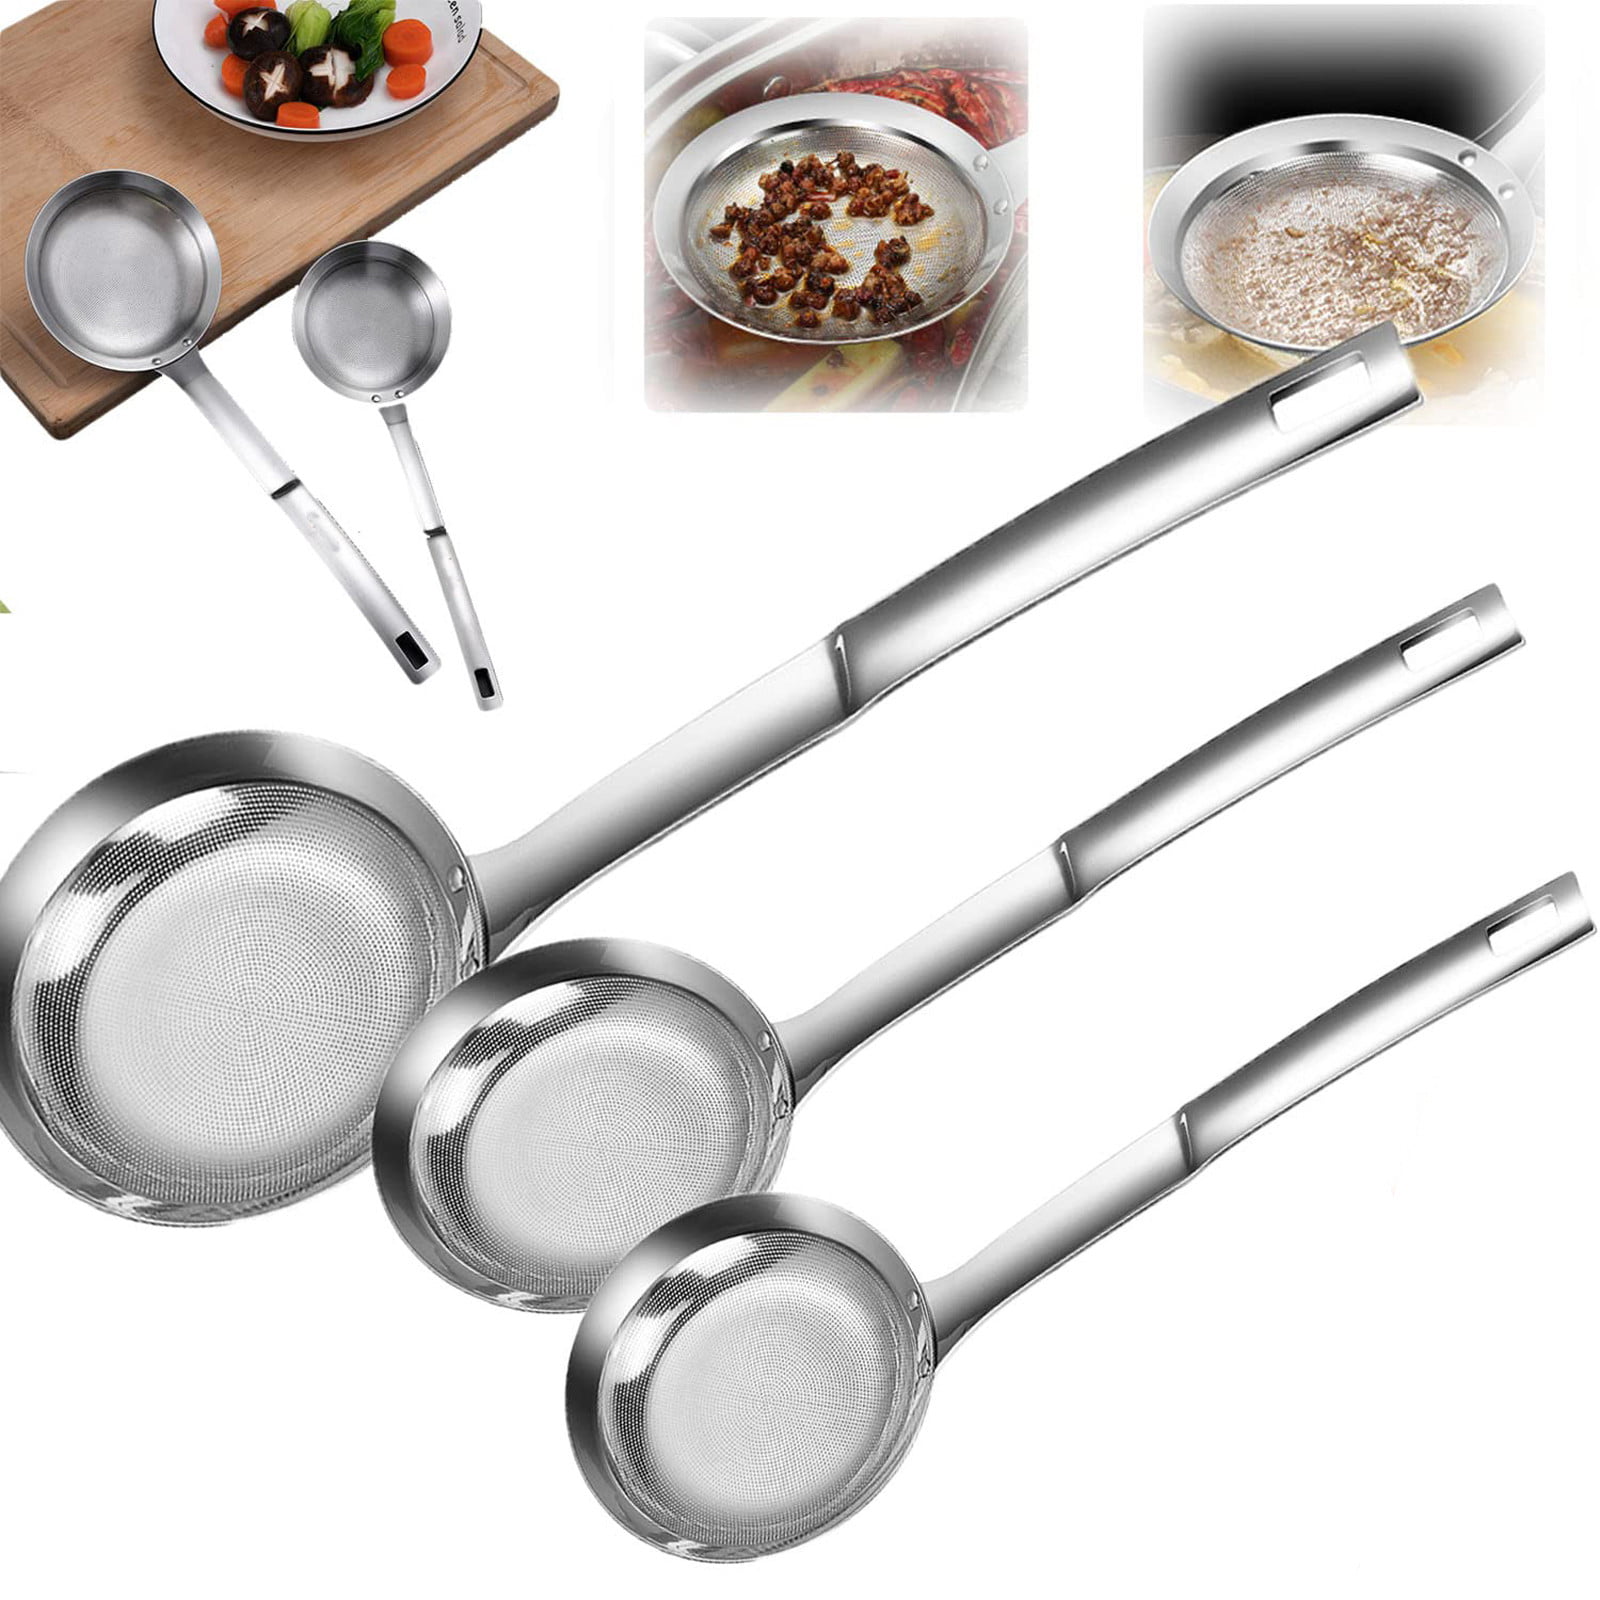 3 Pcs Hot Pot Fat Skimmer Spoon Stainless Steel Fine Mesh Skimmer Spoon for Cooking Frying Skimming Grease and Foam 